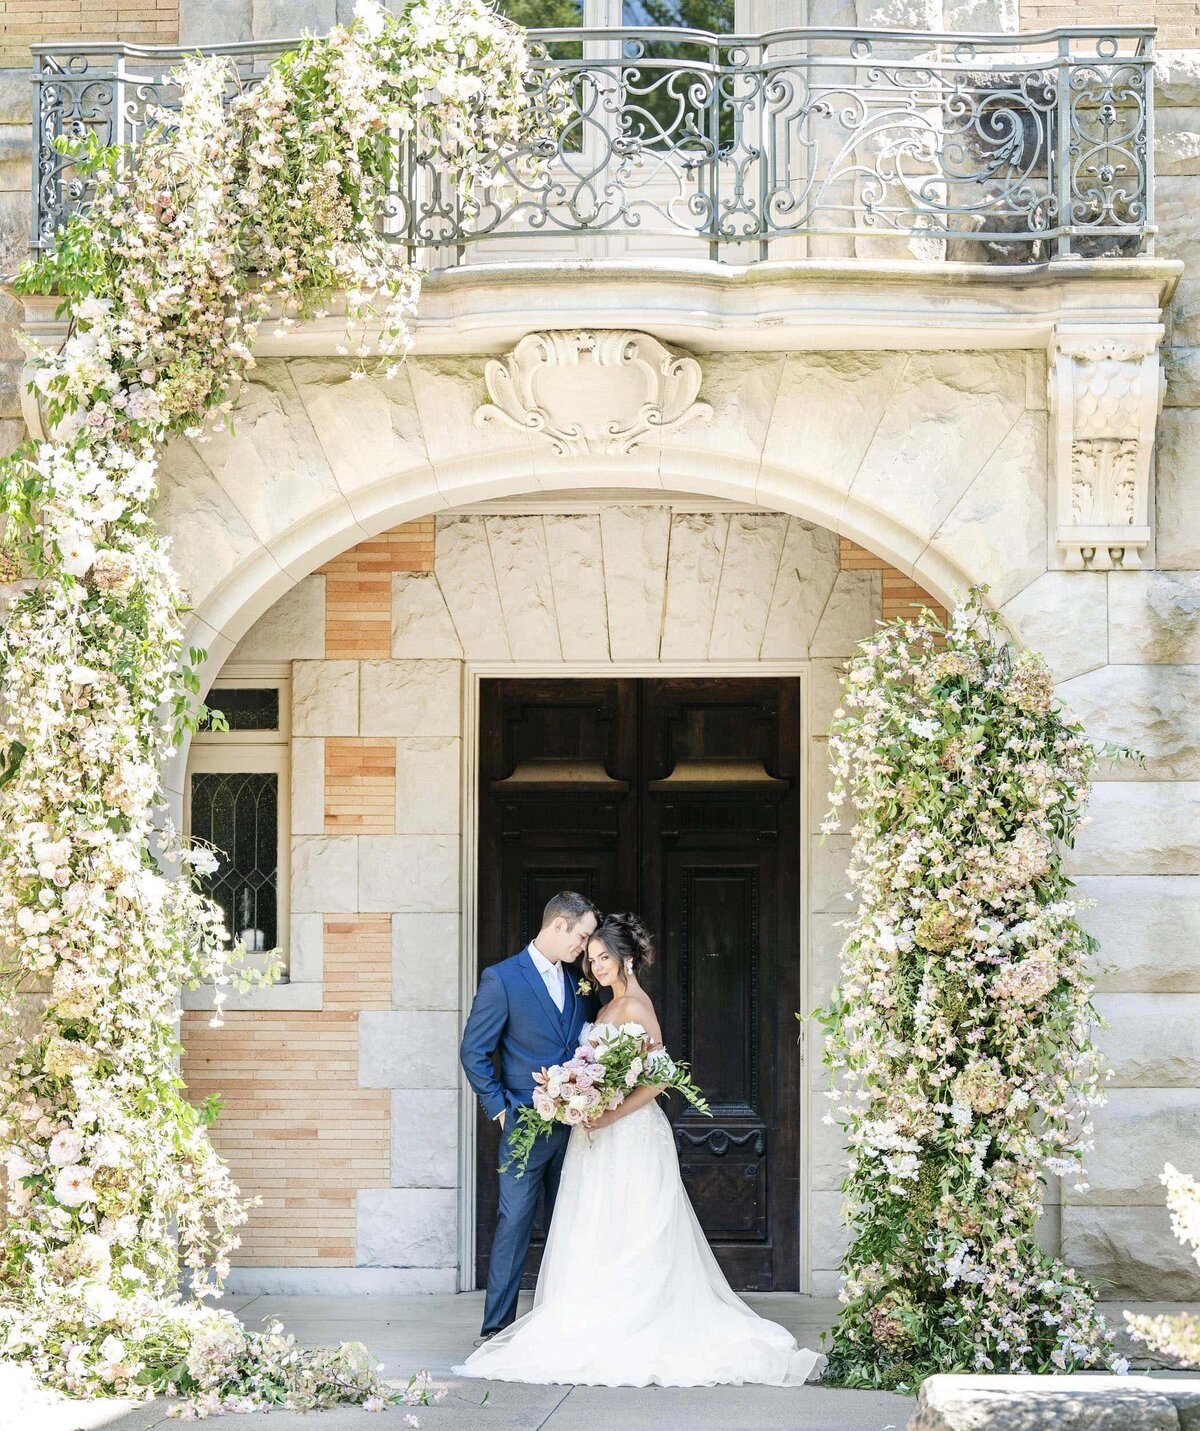 Bride and groom with floral arch installation